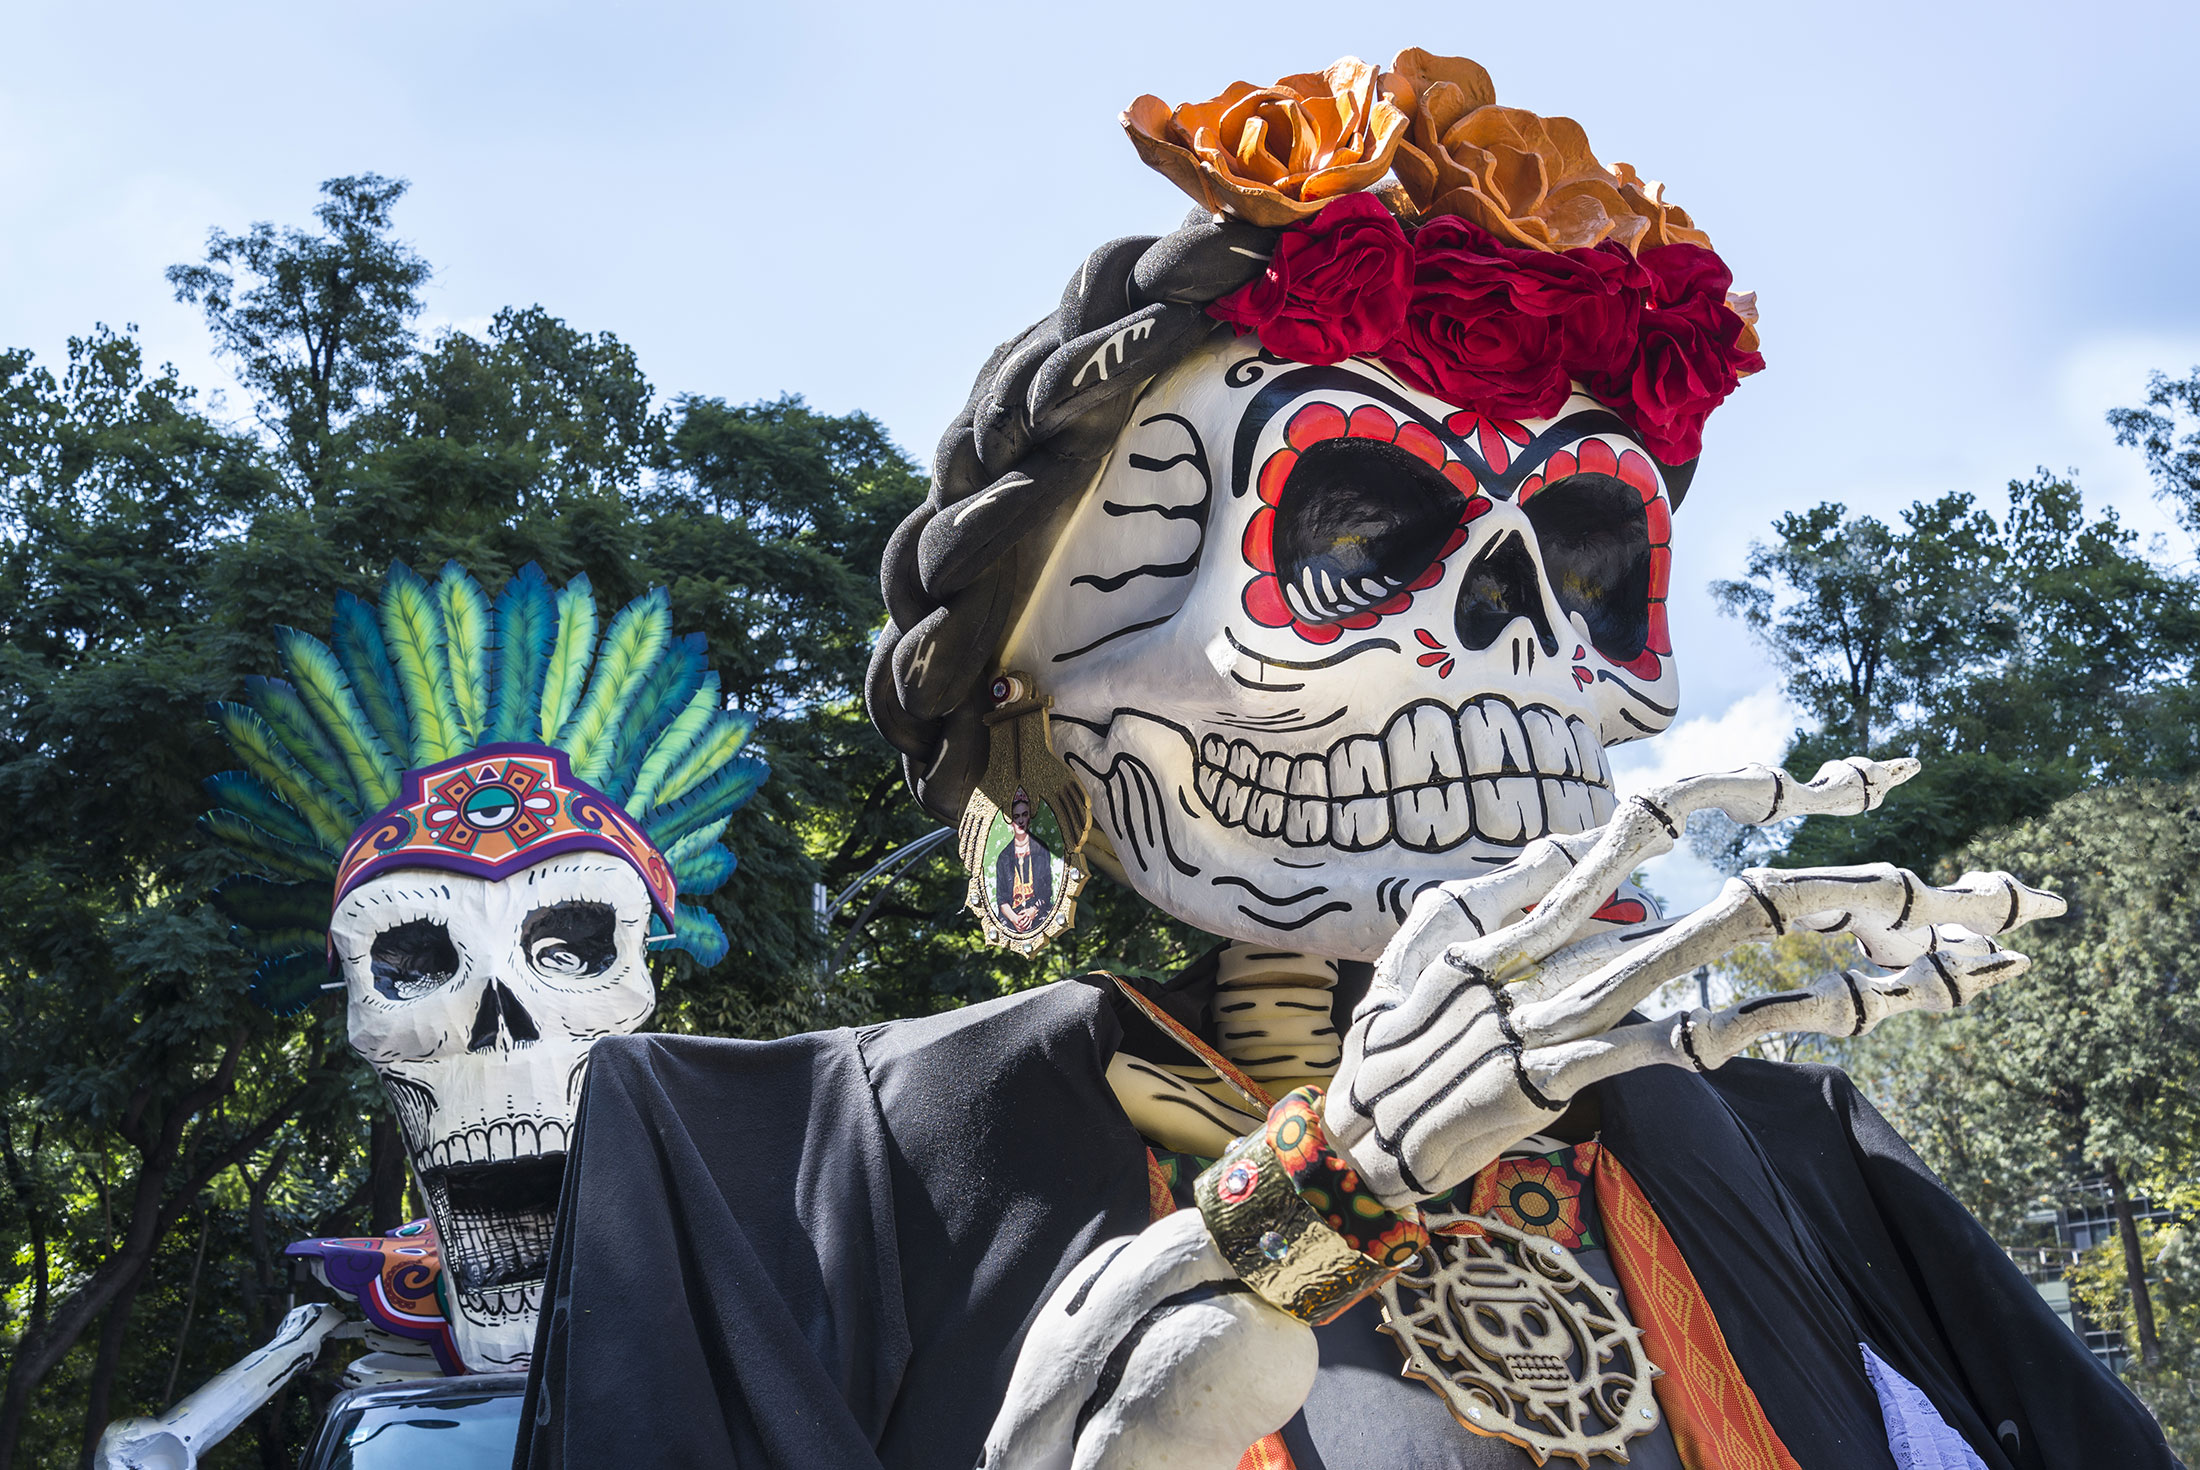 Real Day of the Dead Oaxaca